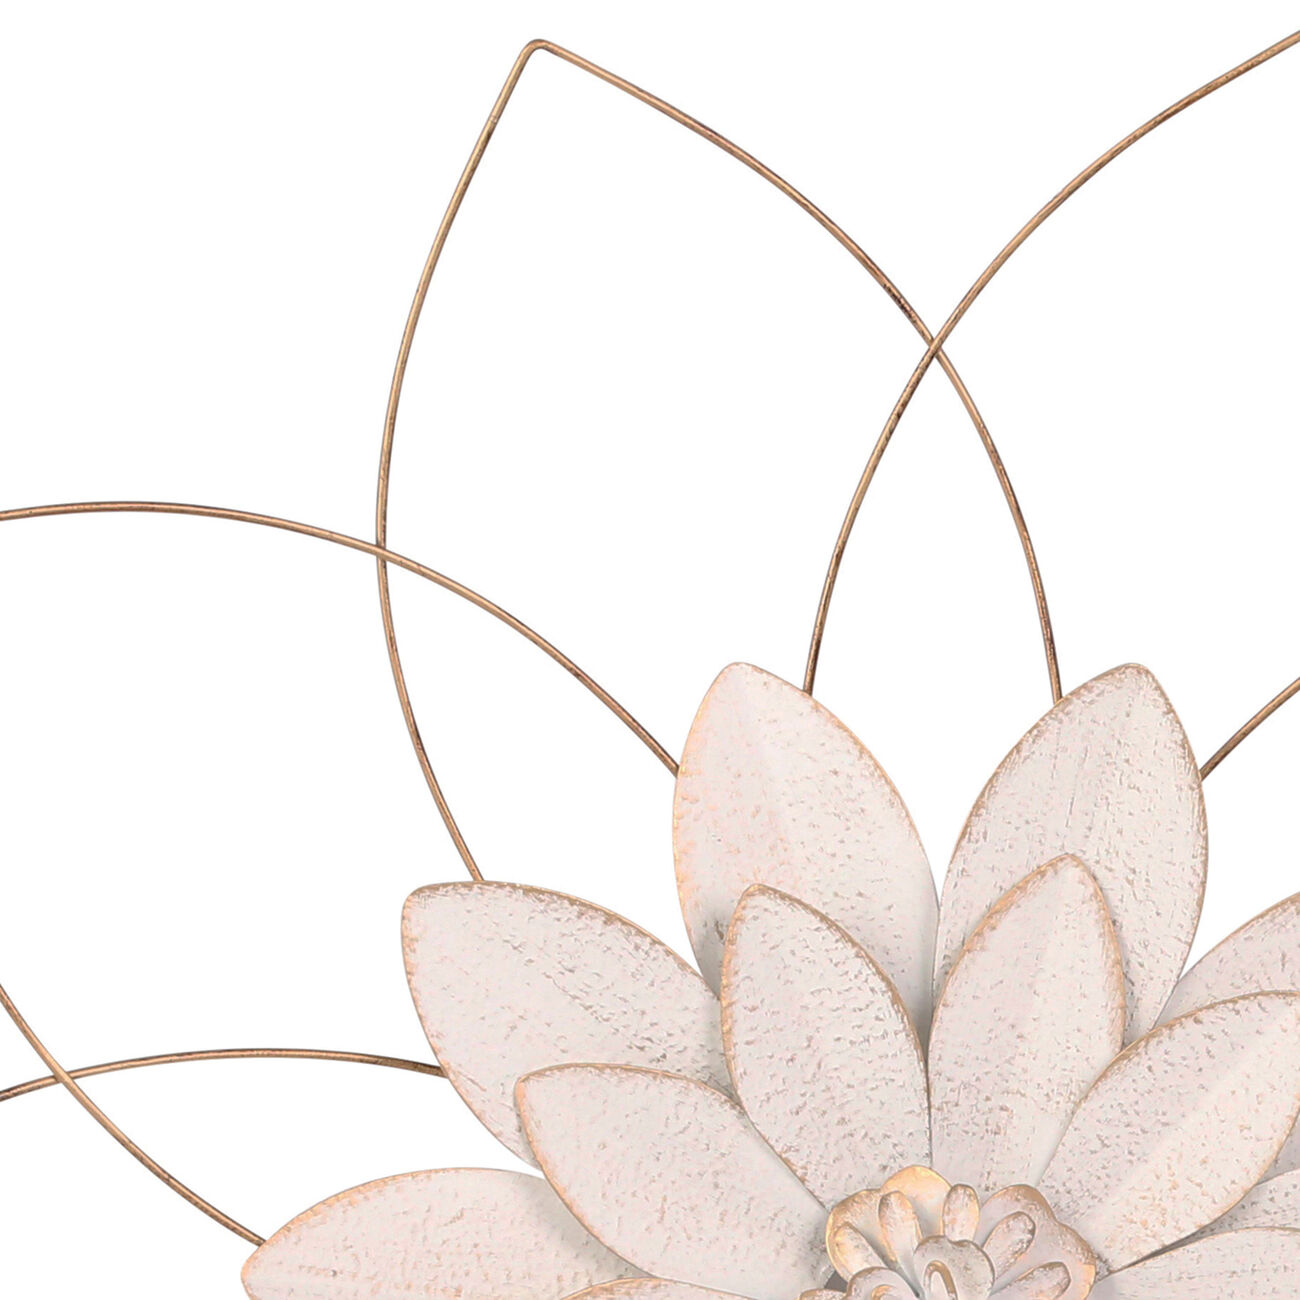 Contemporary Metal Wall Decor with Flower Design, Pink and Gold